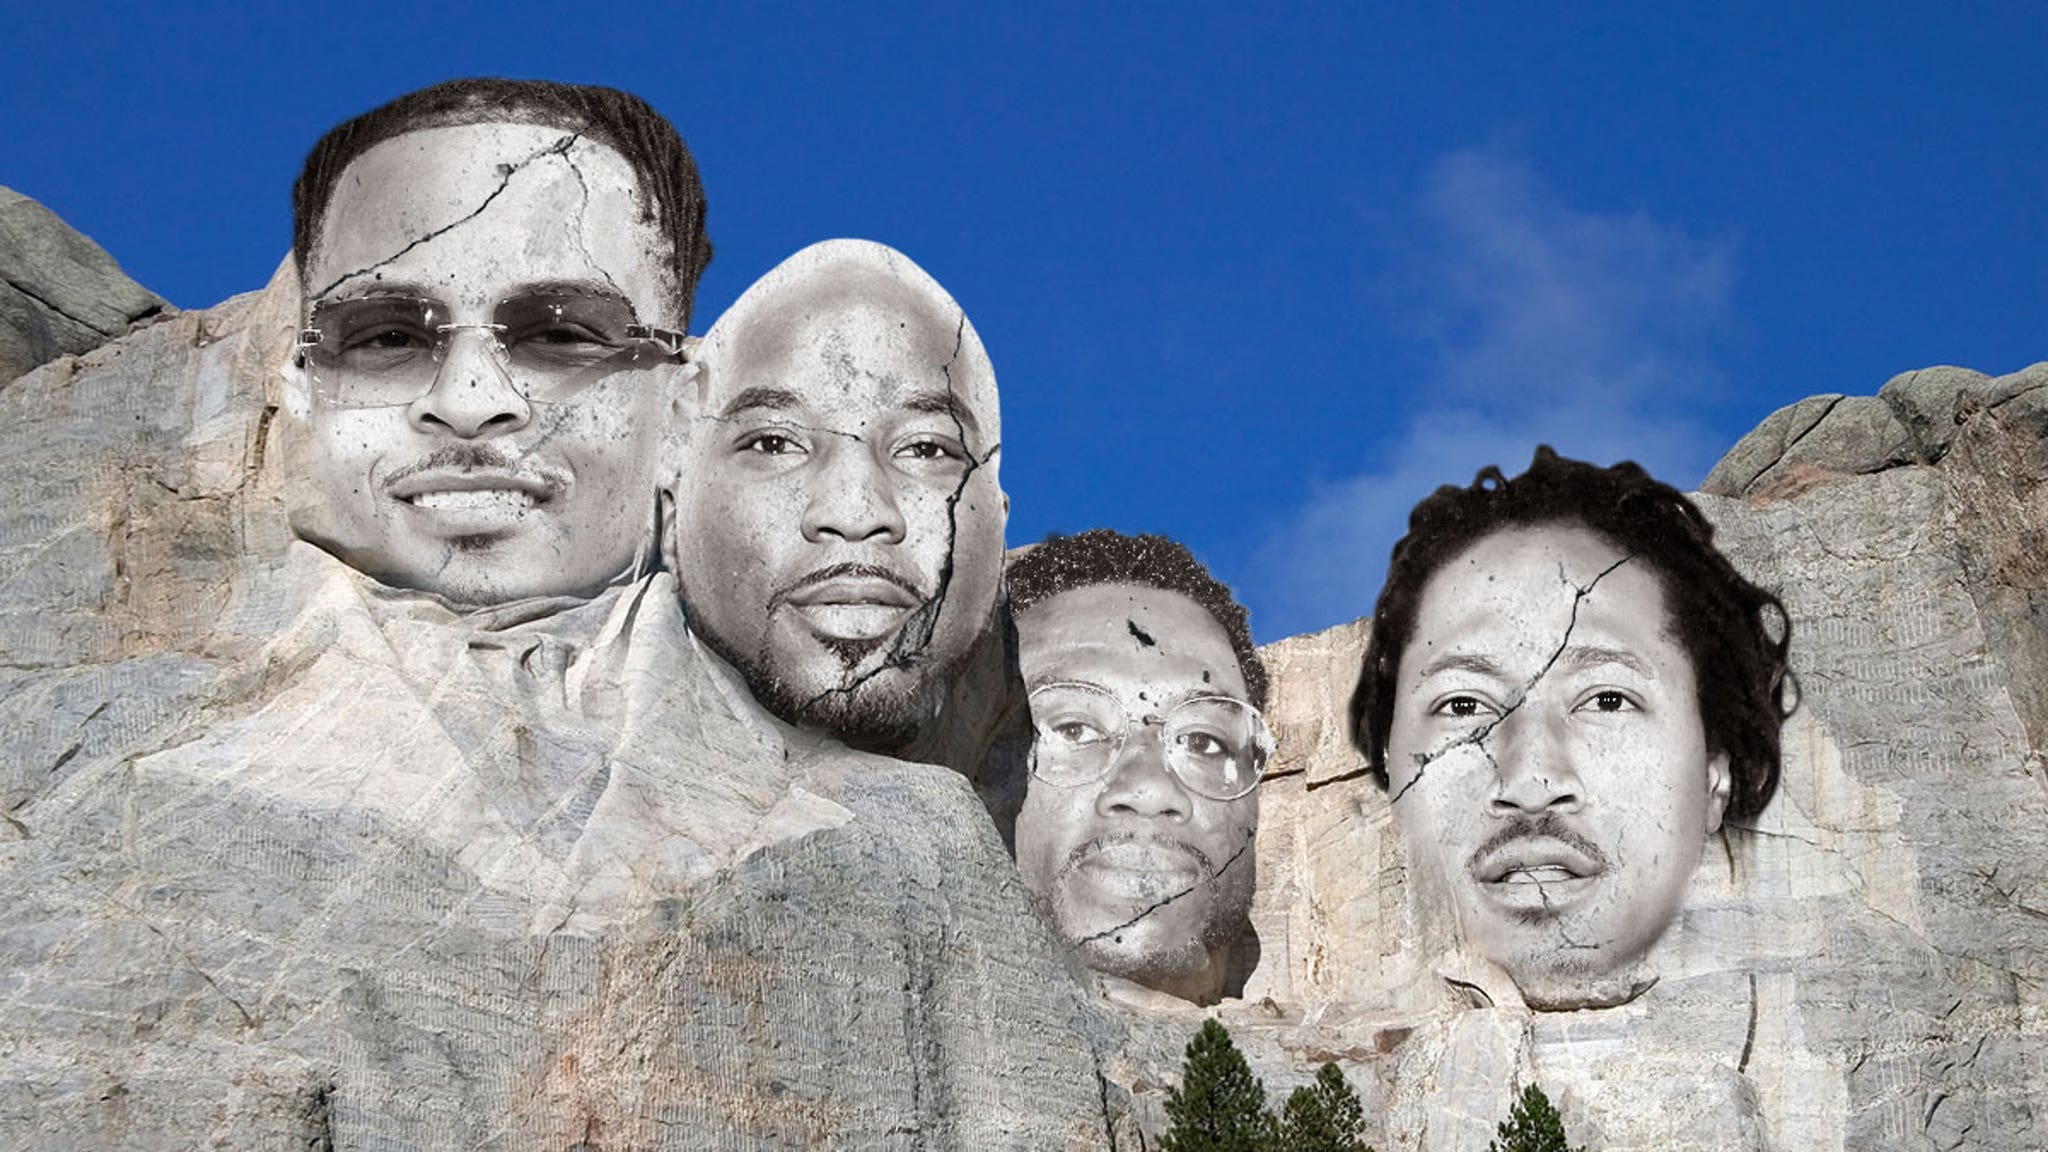 T.I. Adds Future To His Trap Mt. Rushmore With Jeezy & Gucci Mane #GucciMane